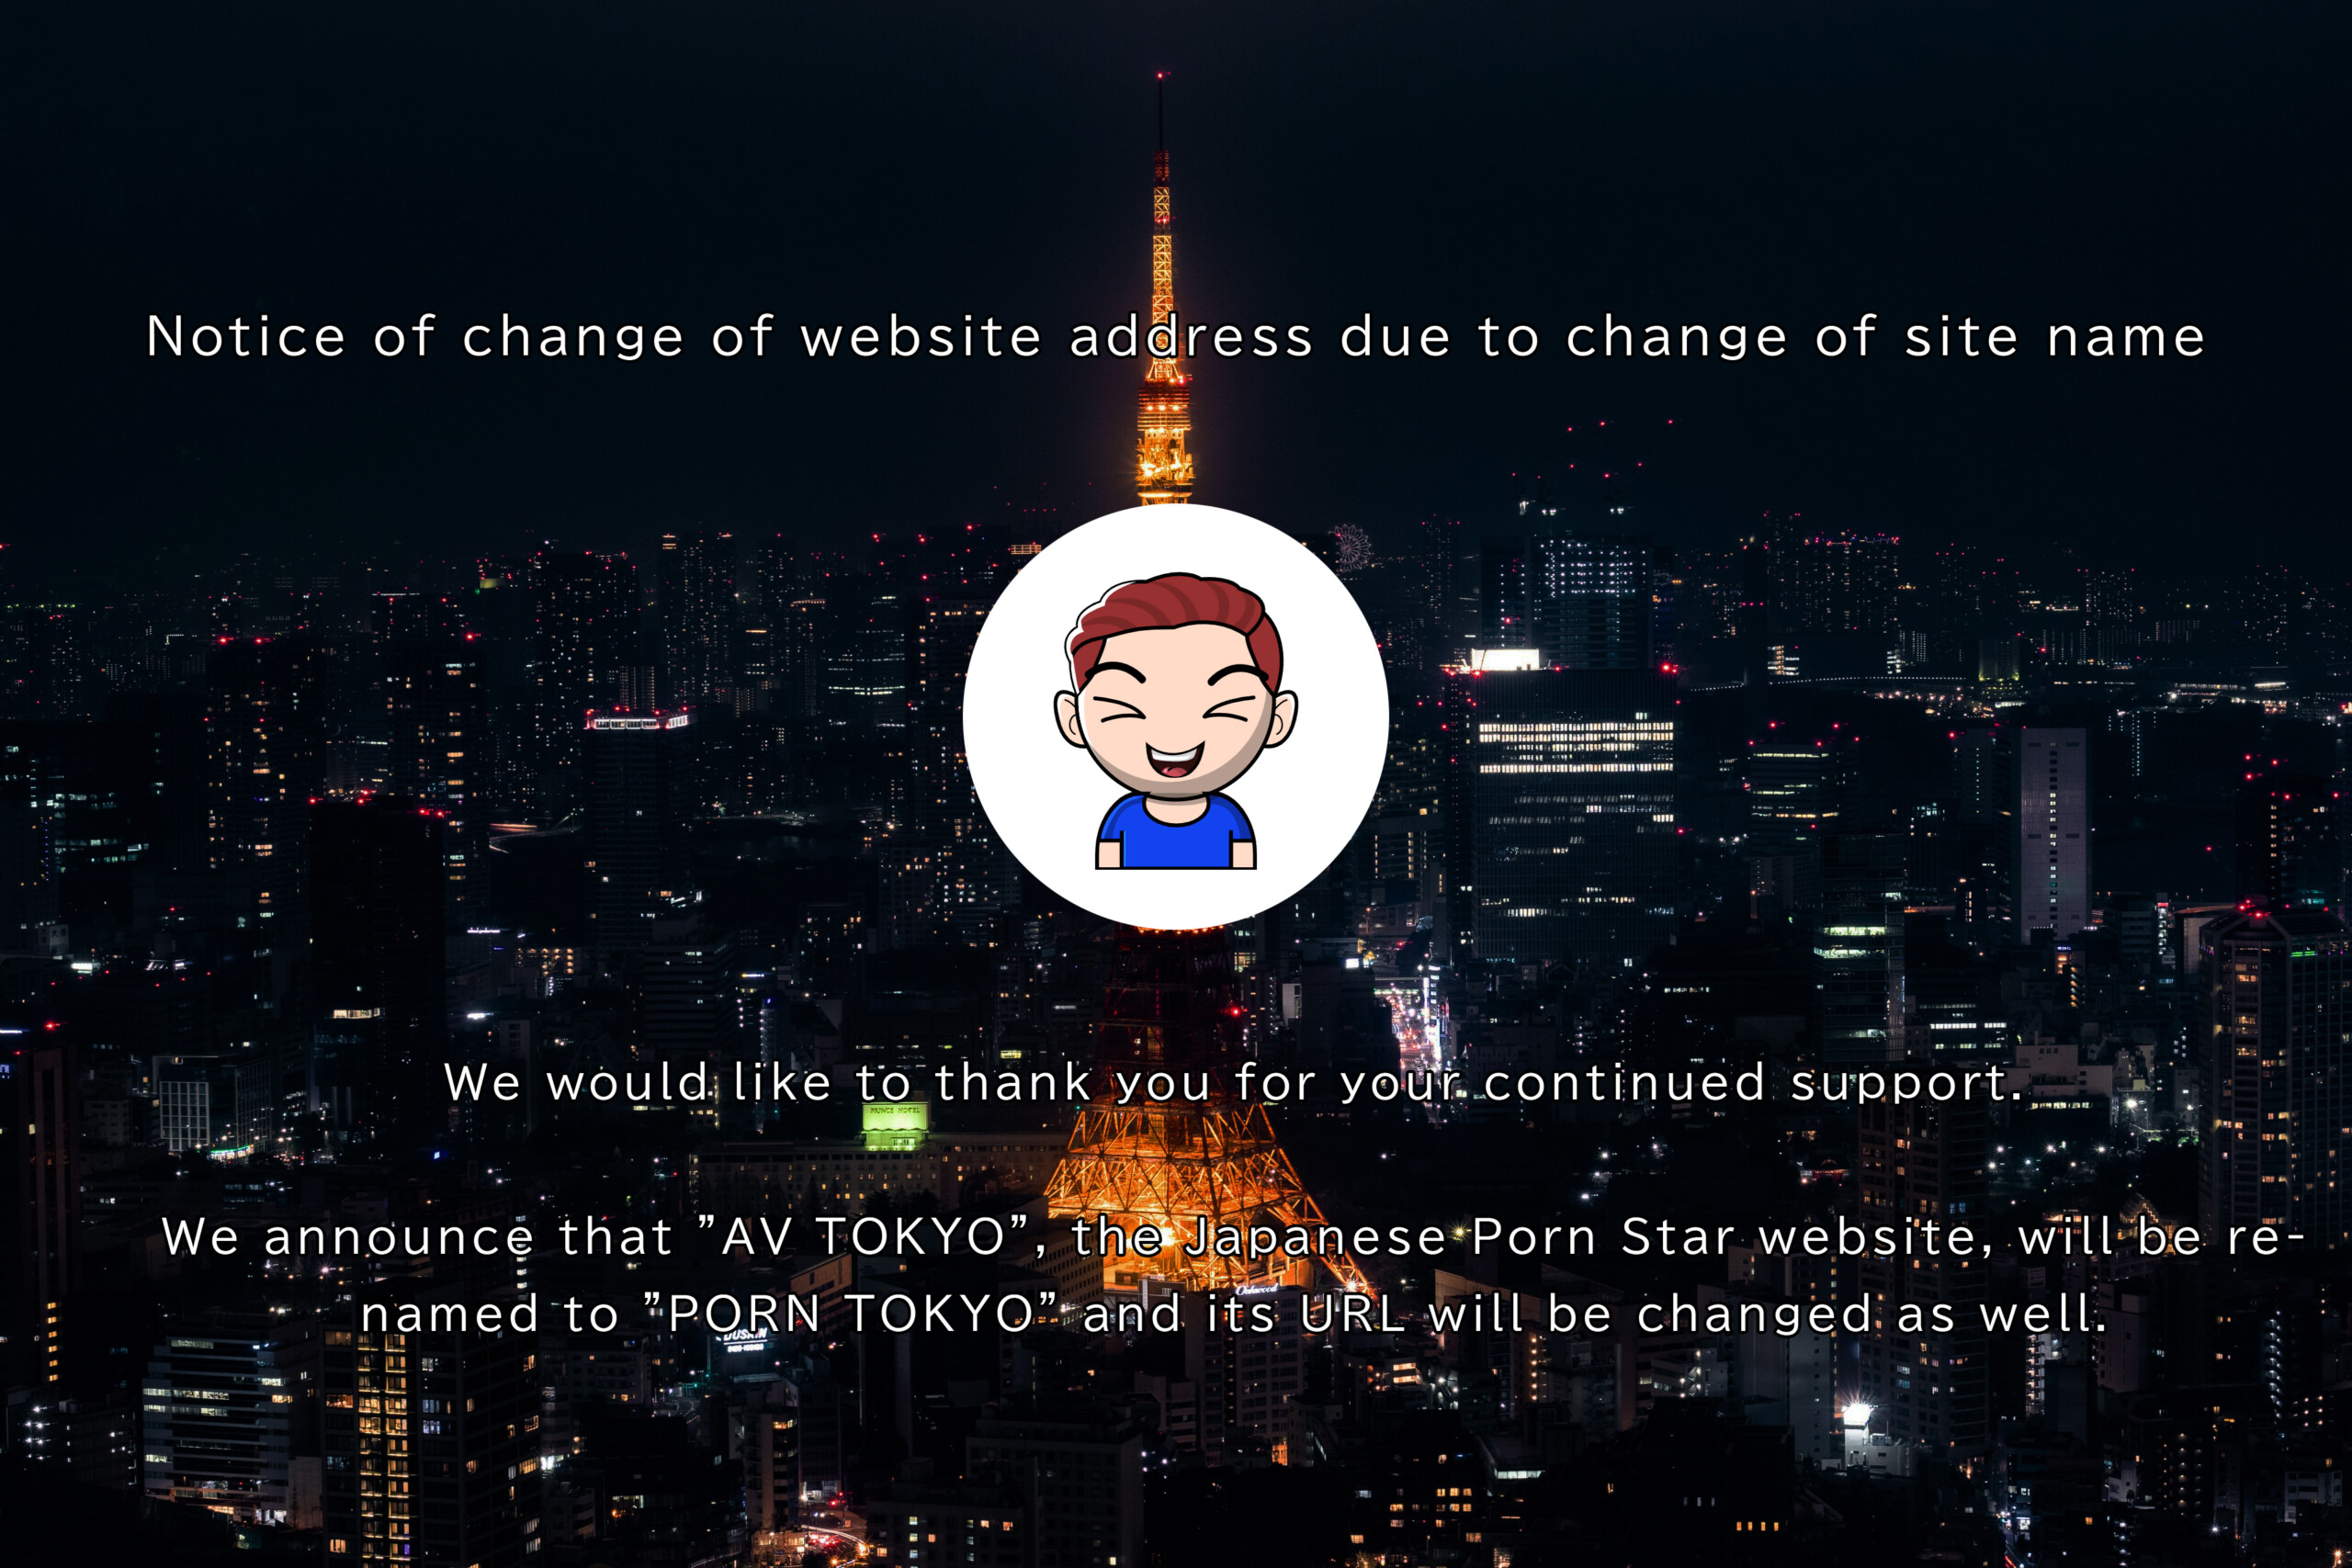 Notice of change of website address due to change of site name